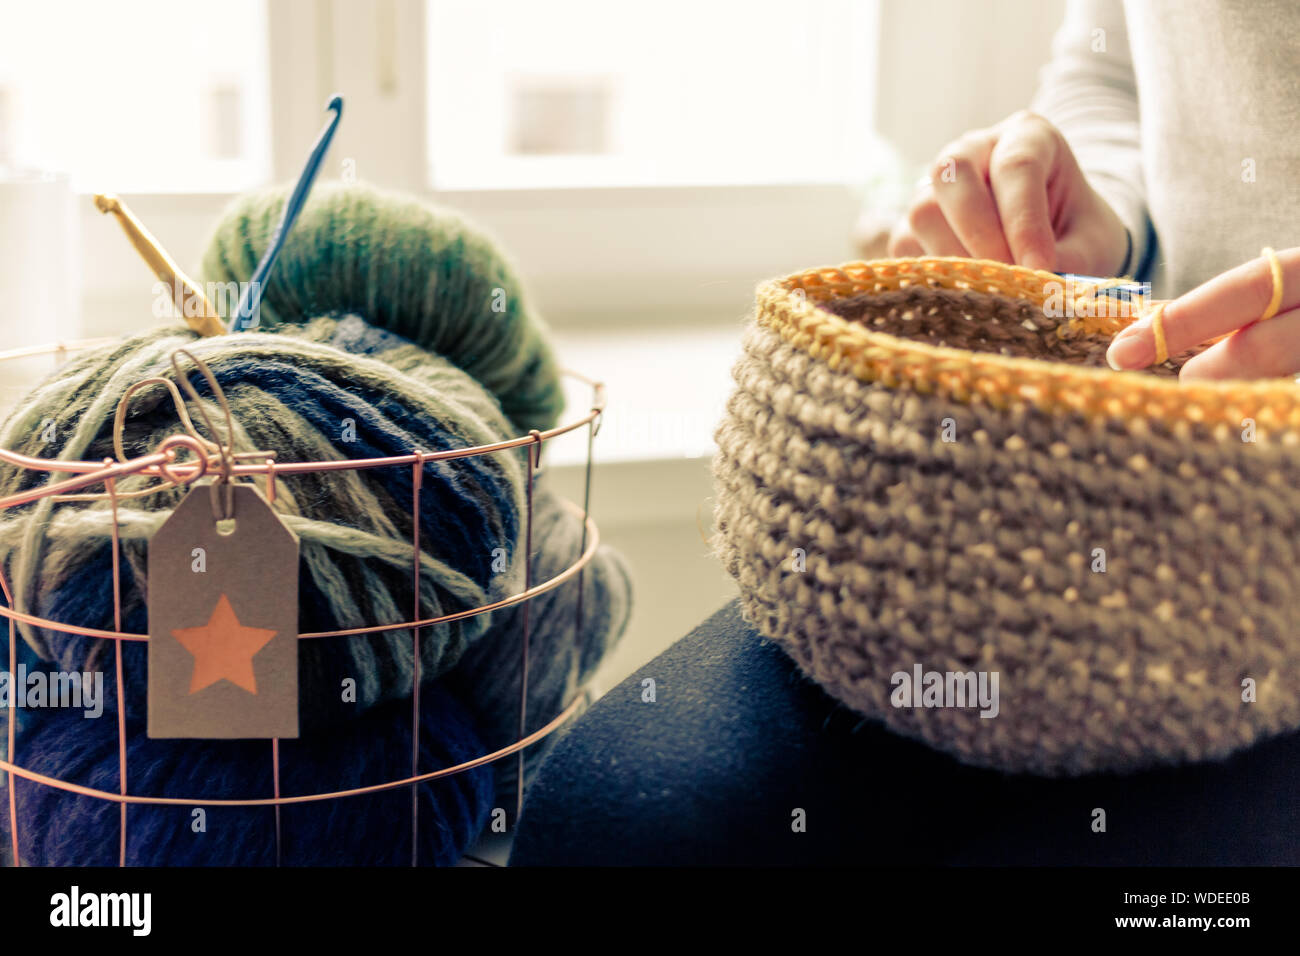 Midsection Of Woman Knitting Basket At Home Stock Photo